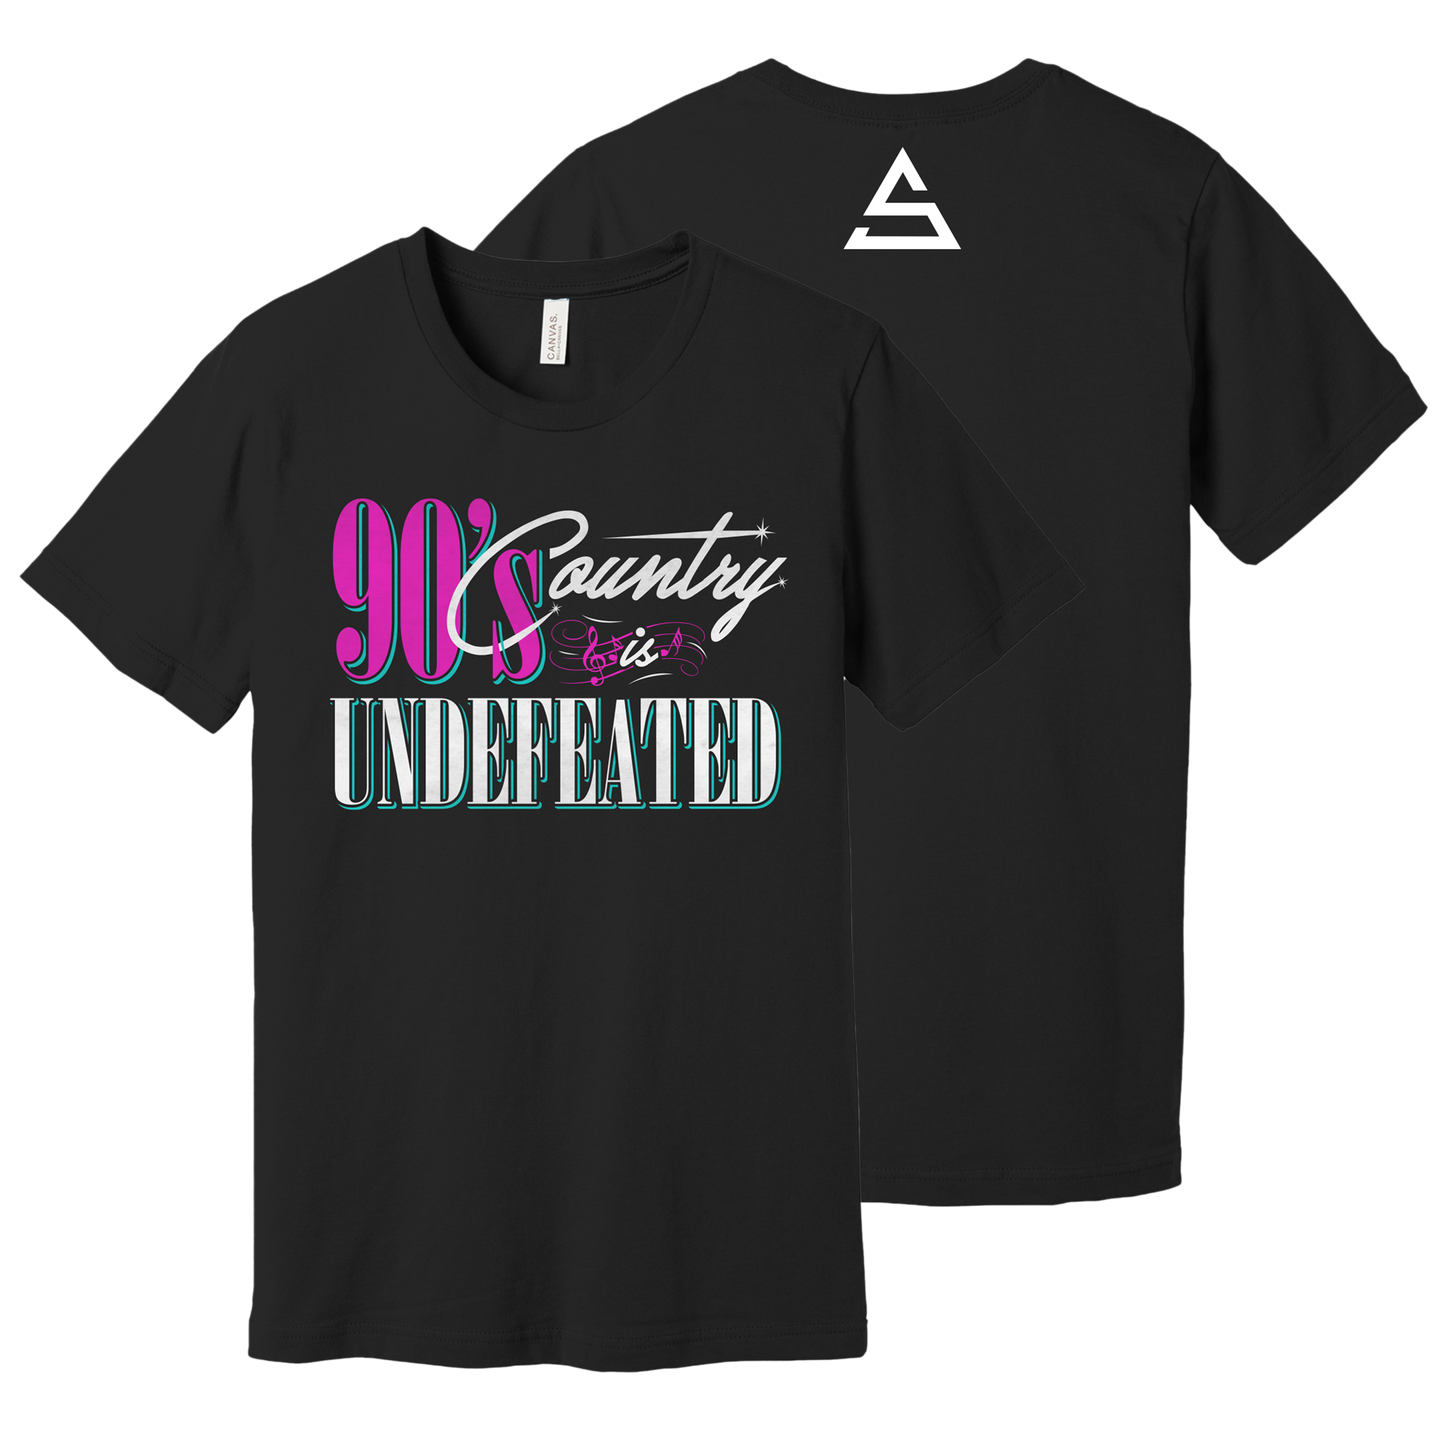 Adam Sanders 90's Country is Undefeated Tee